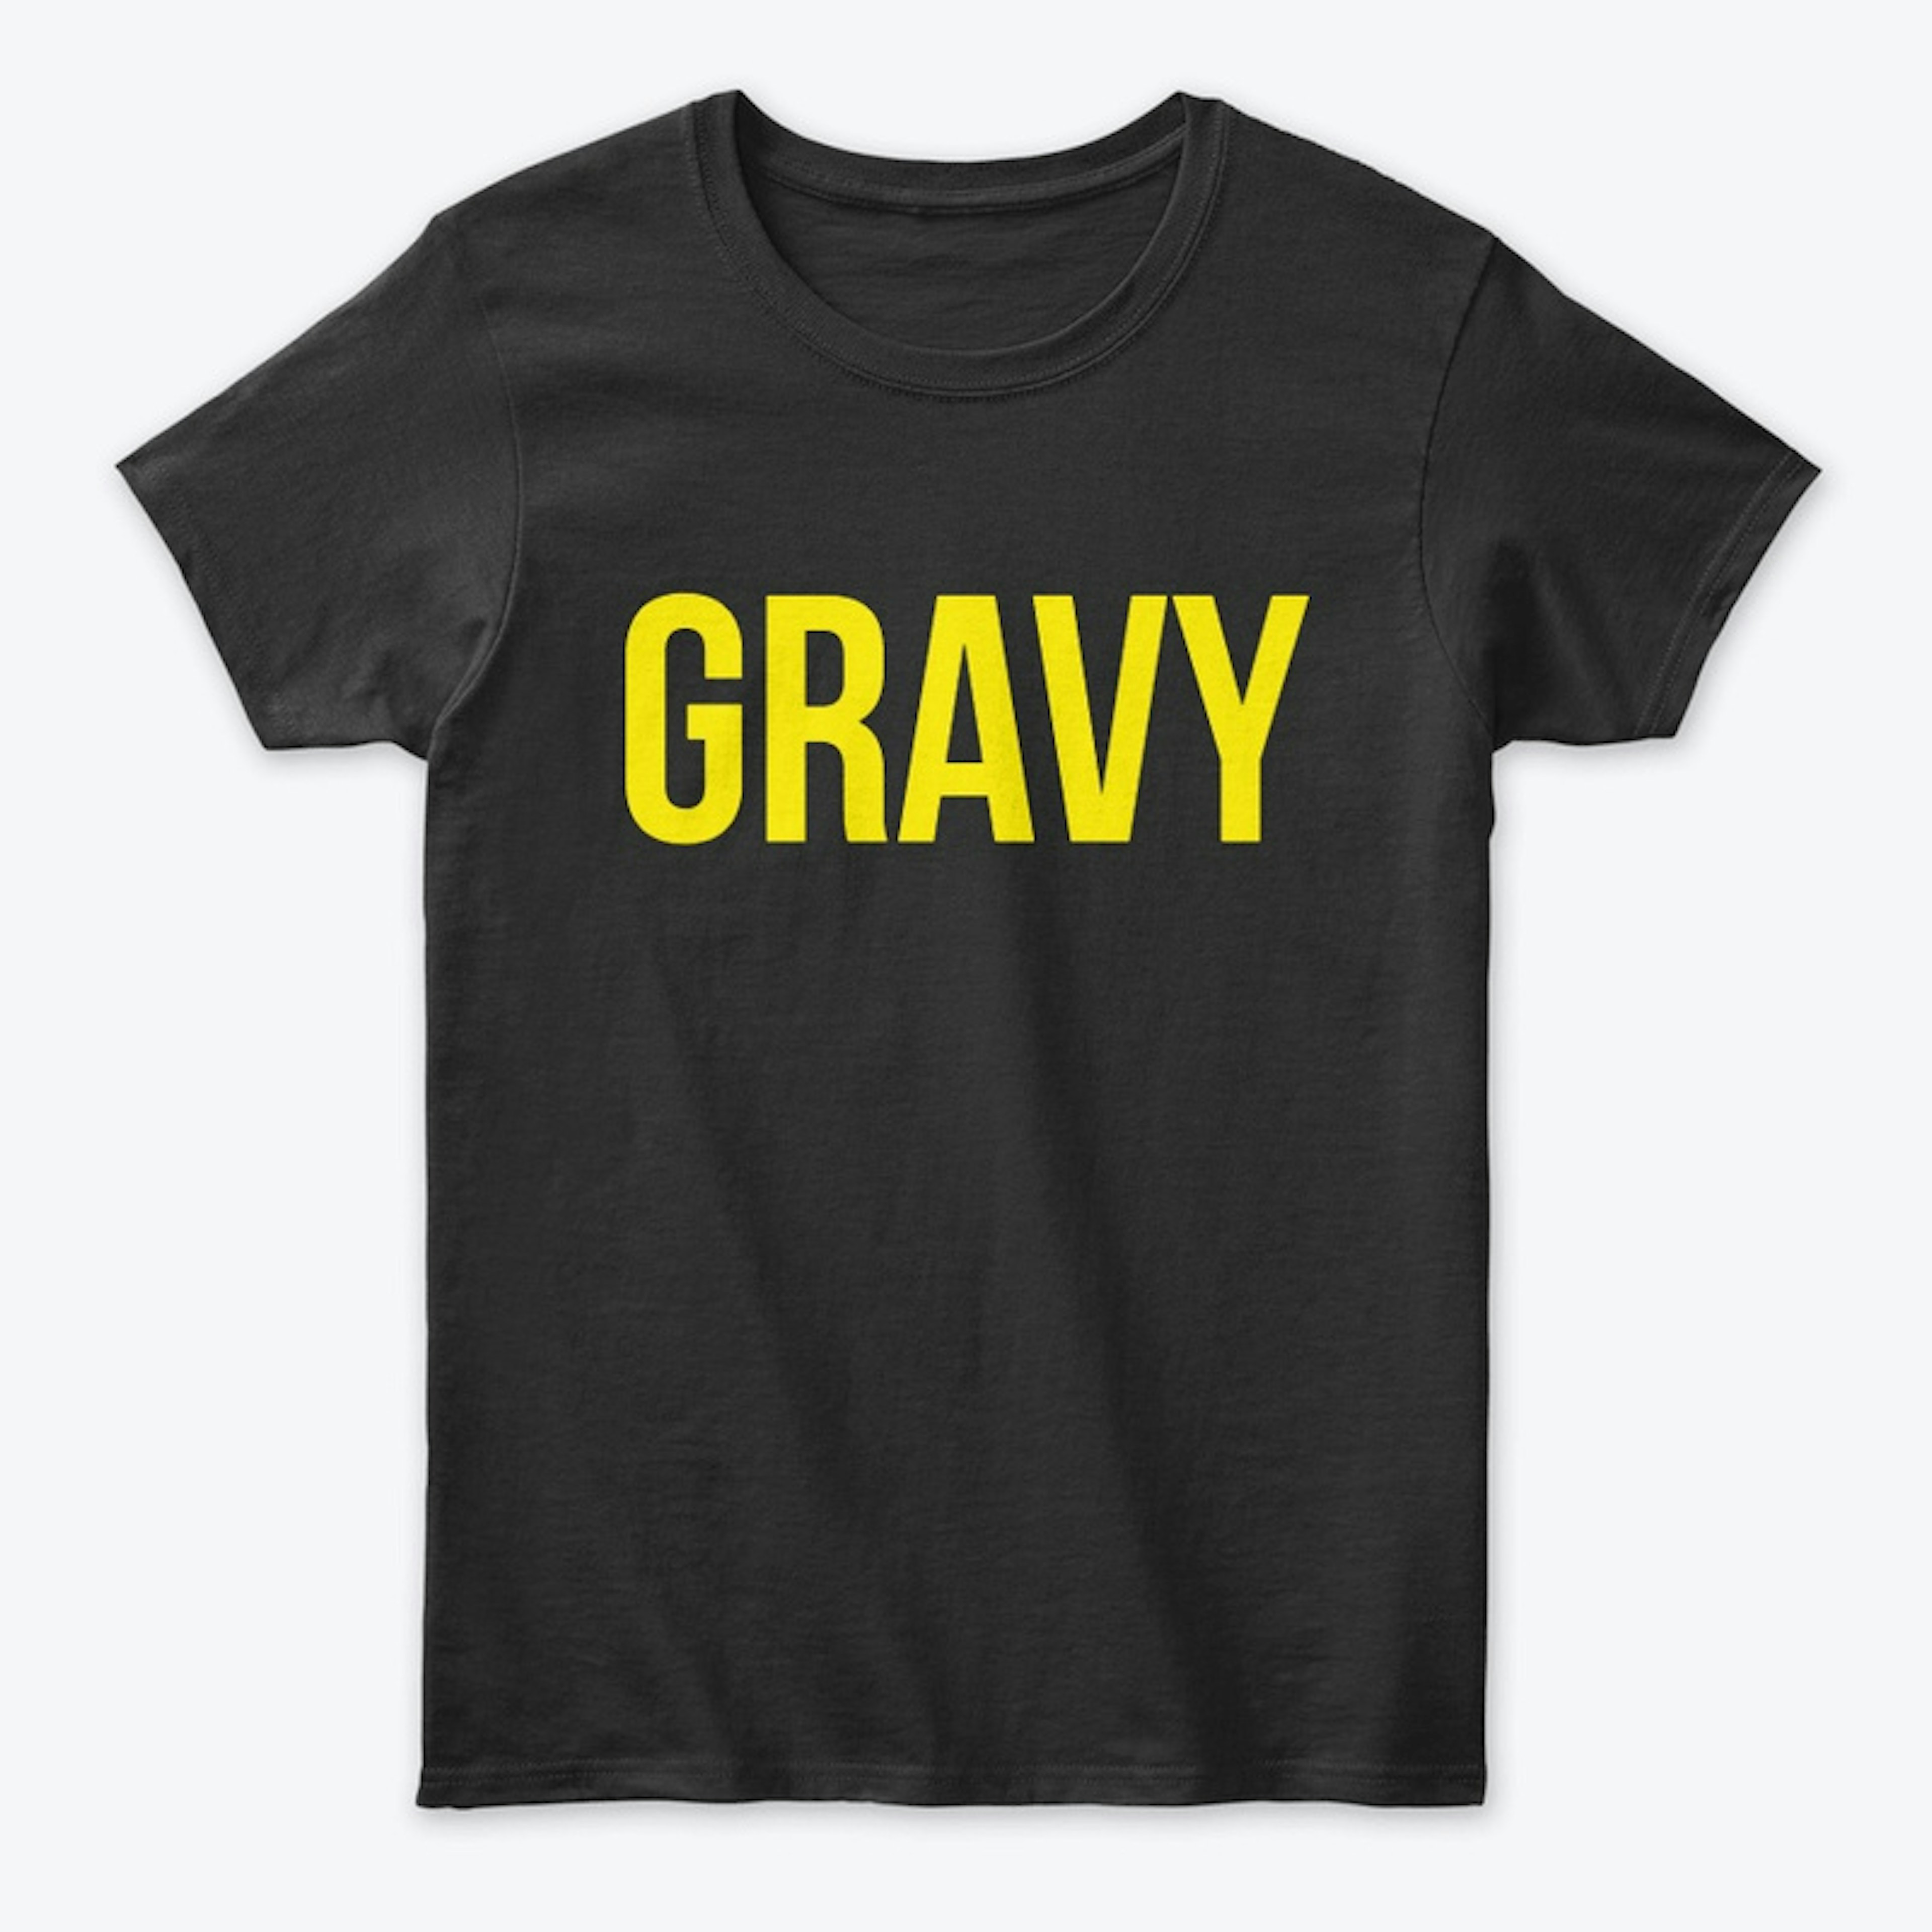 The Sauce and Gravy Channel Women's Tee